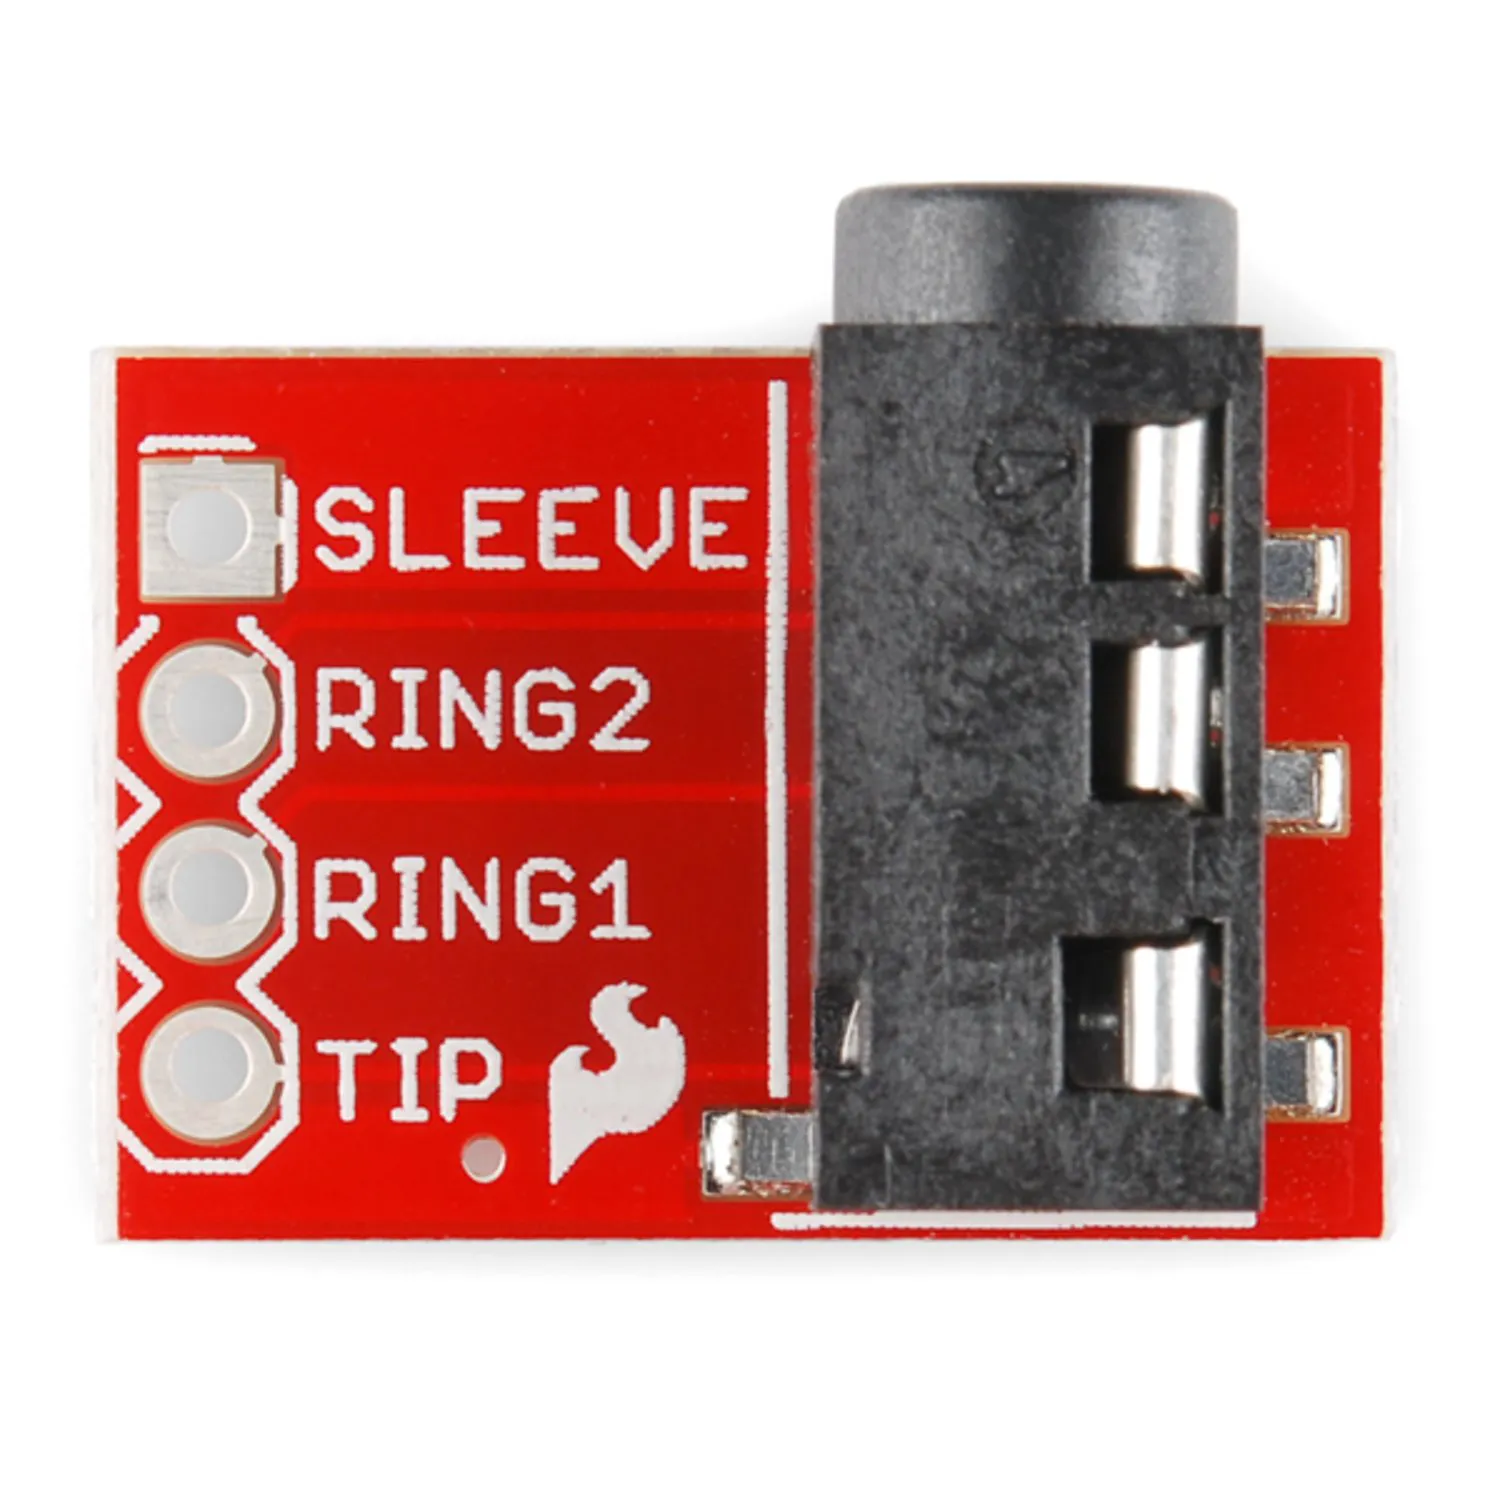 Photo of SparkFun TRRS 3.5mm Jack Breakout